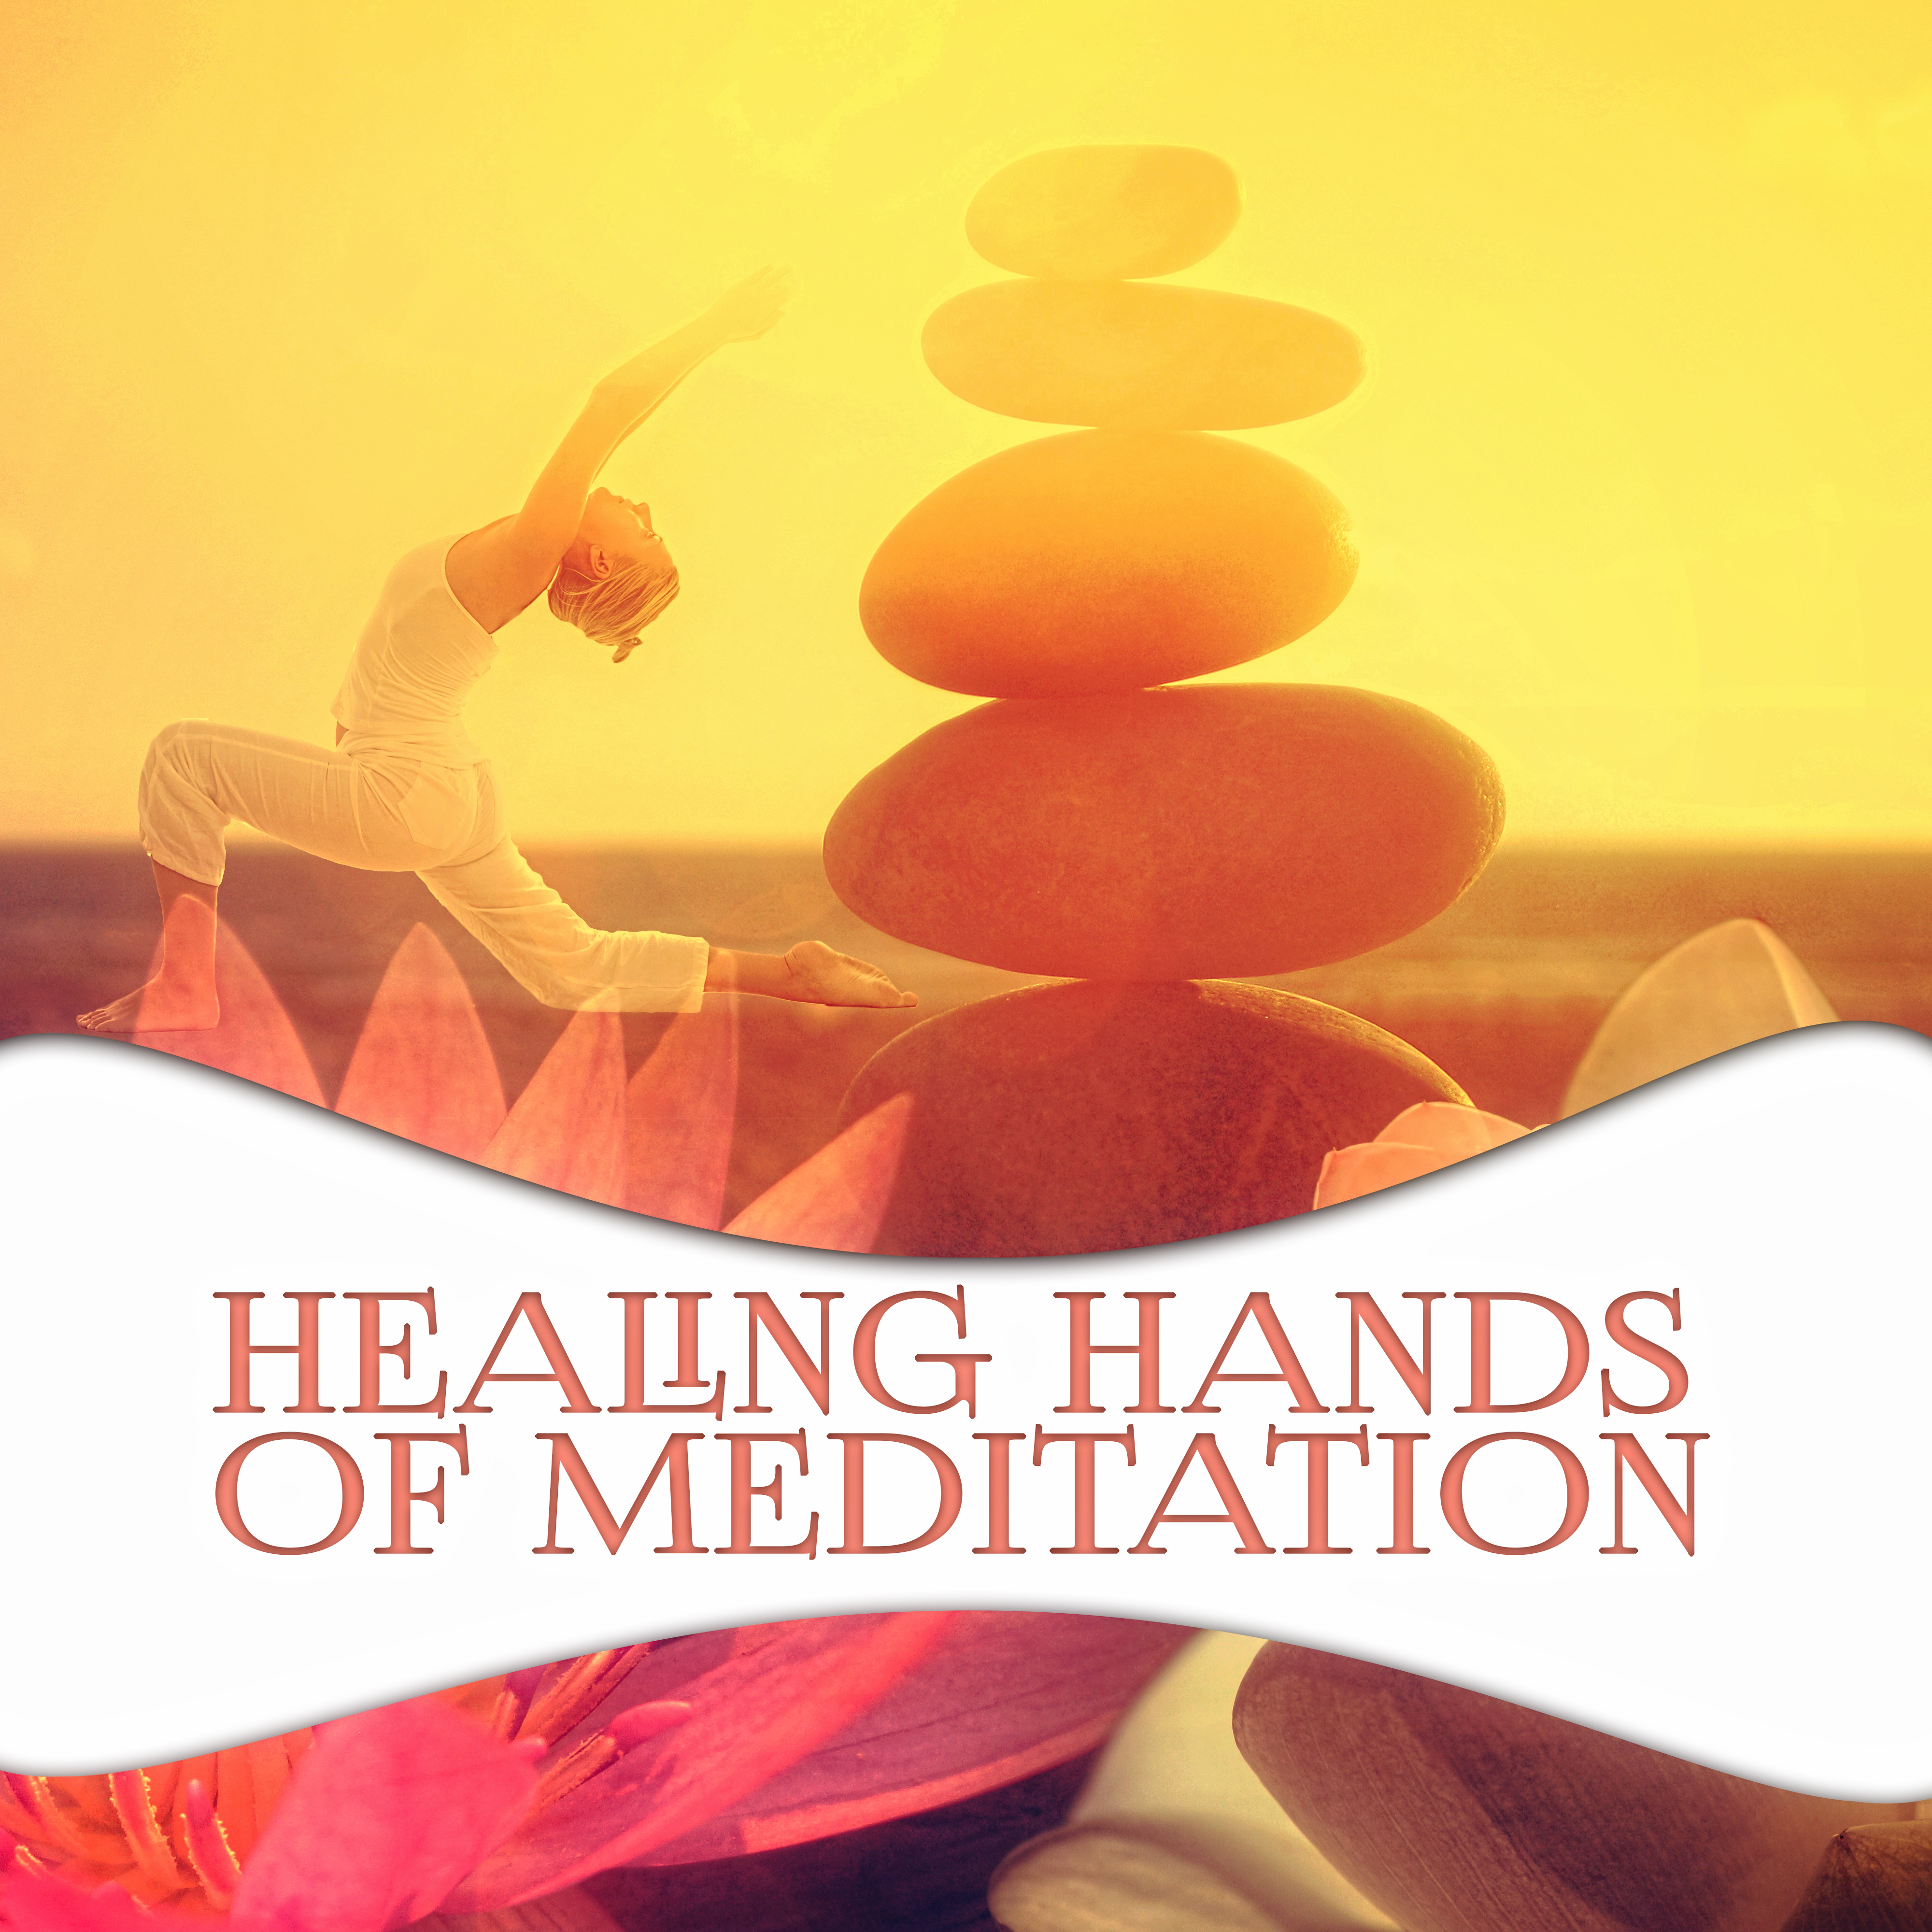 Healing Hands Meditation - Deep Relaxation Music Therapy for Massage, Nature of Sounds for Reiki, Yoga, Sleep